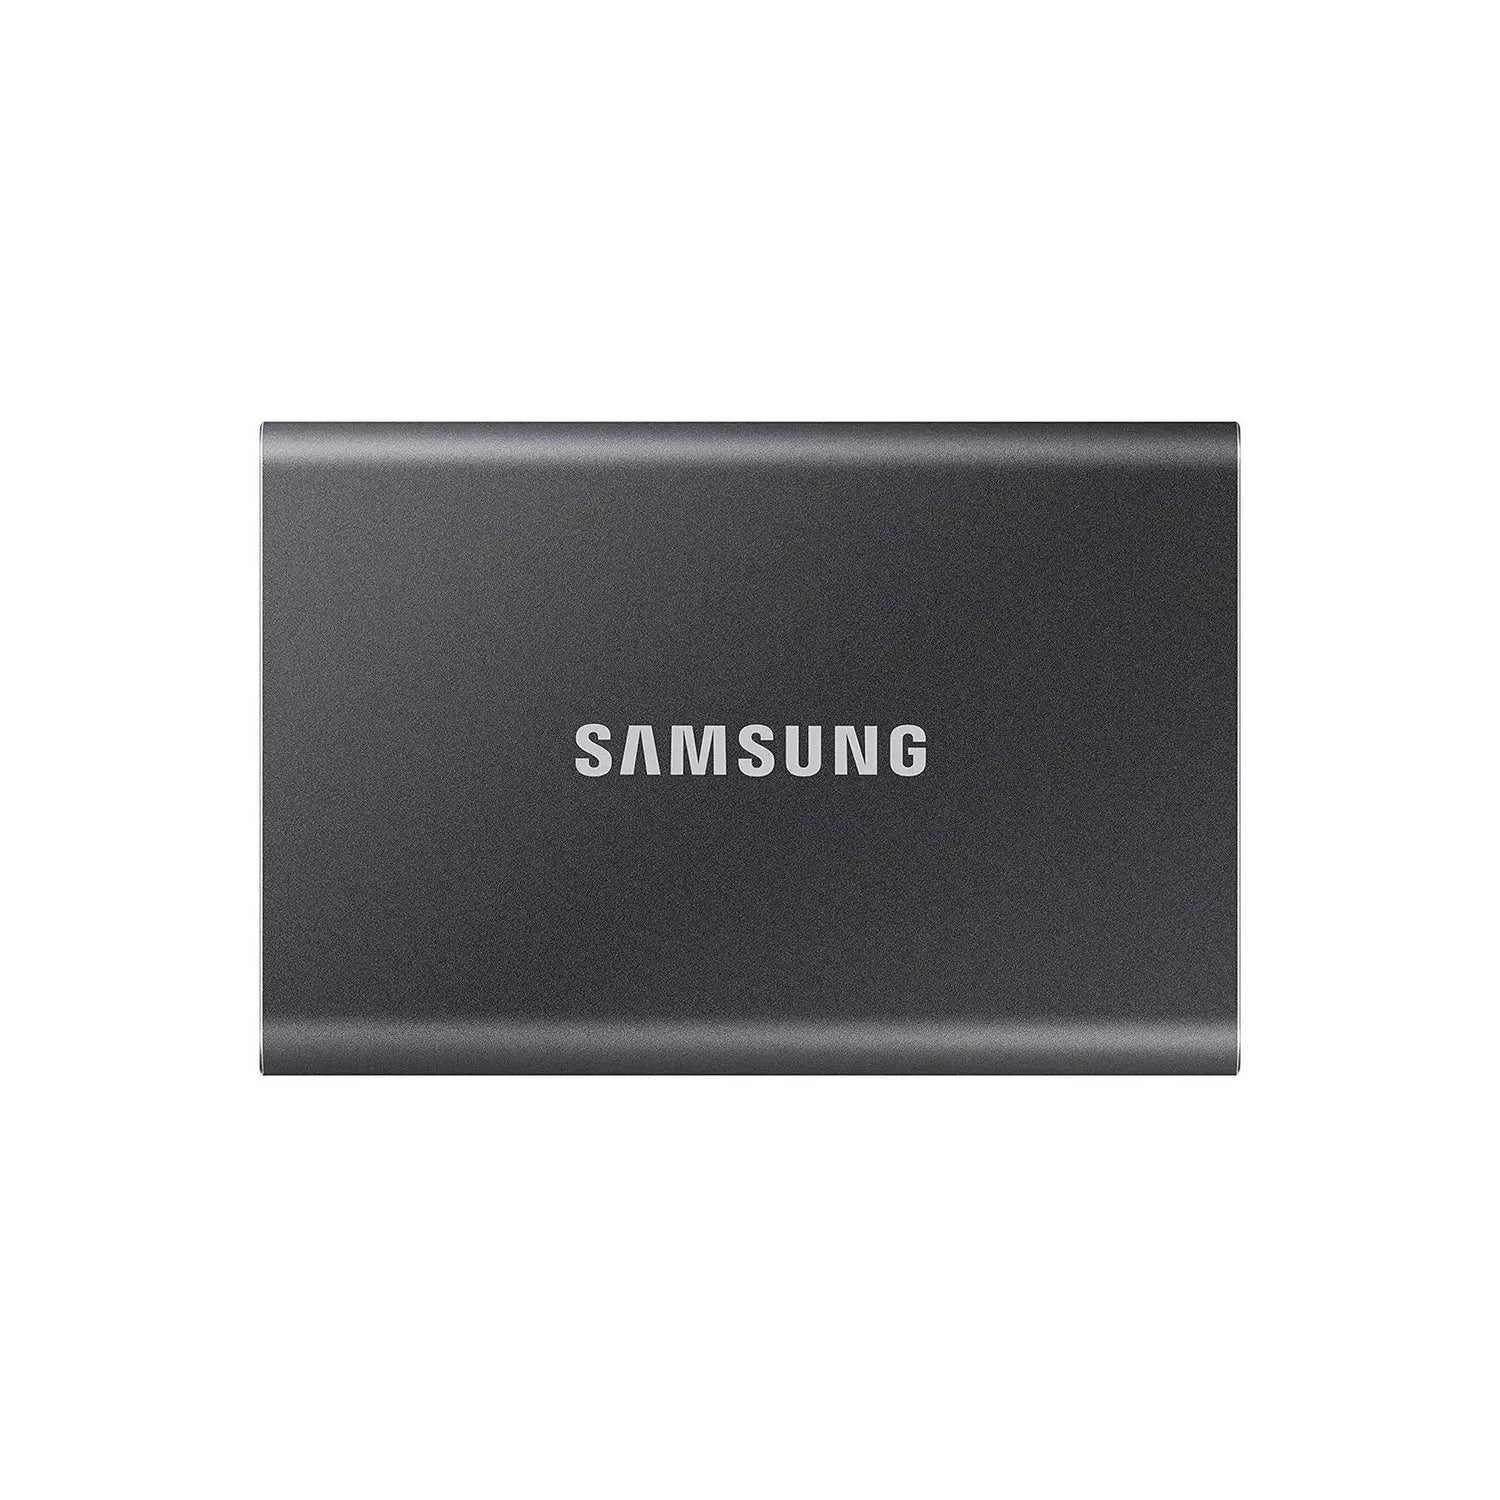 Samsung T7 USB 3.2 Gen 2 Portable Solid State Drive Hard Drive